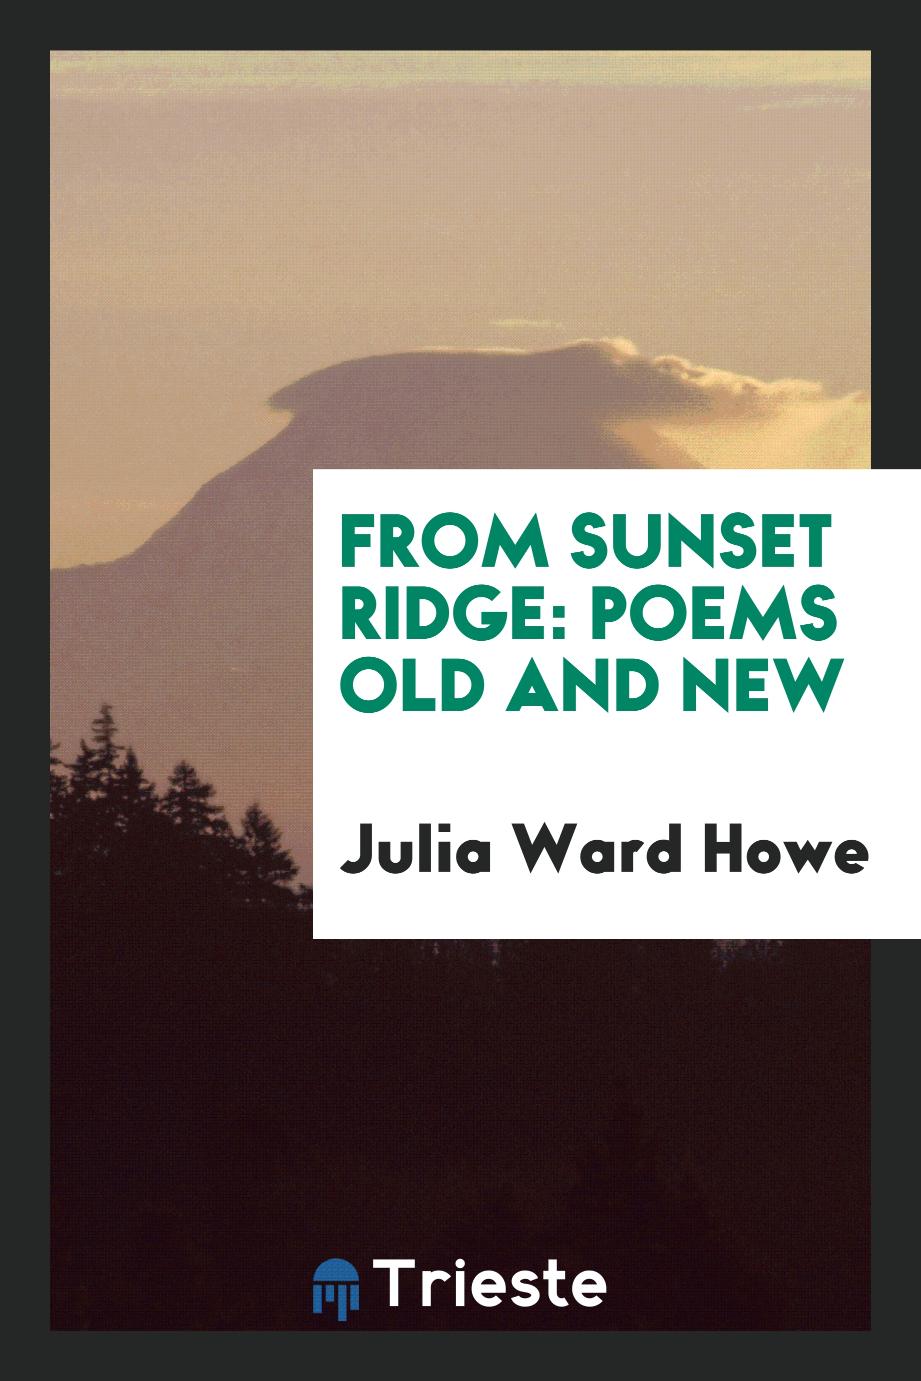 From Sunset Ridge: poems old and new